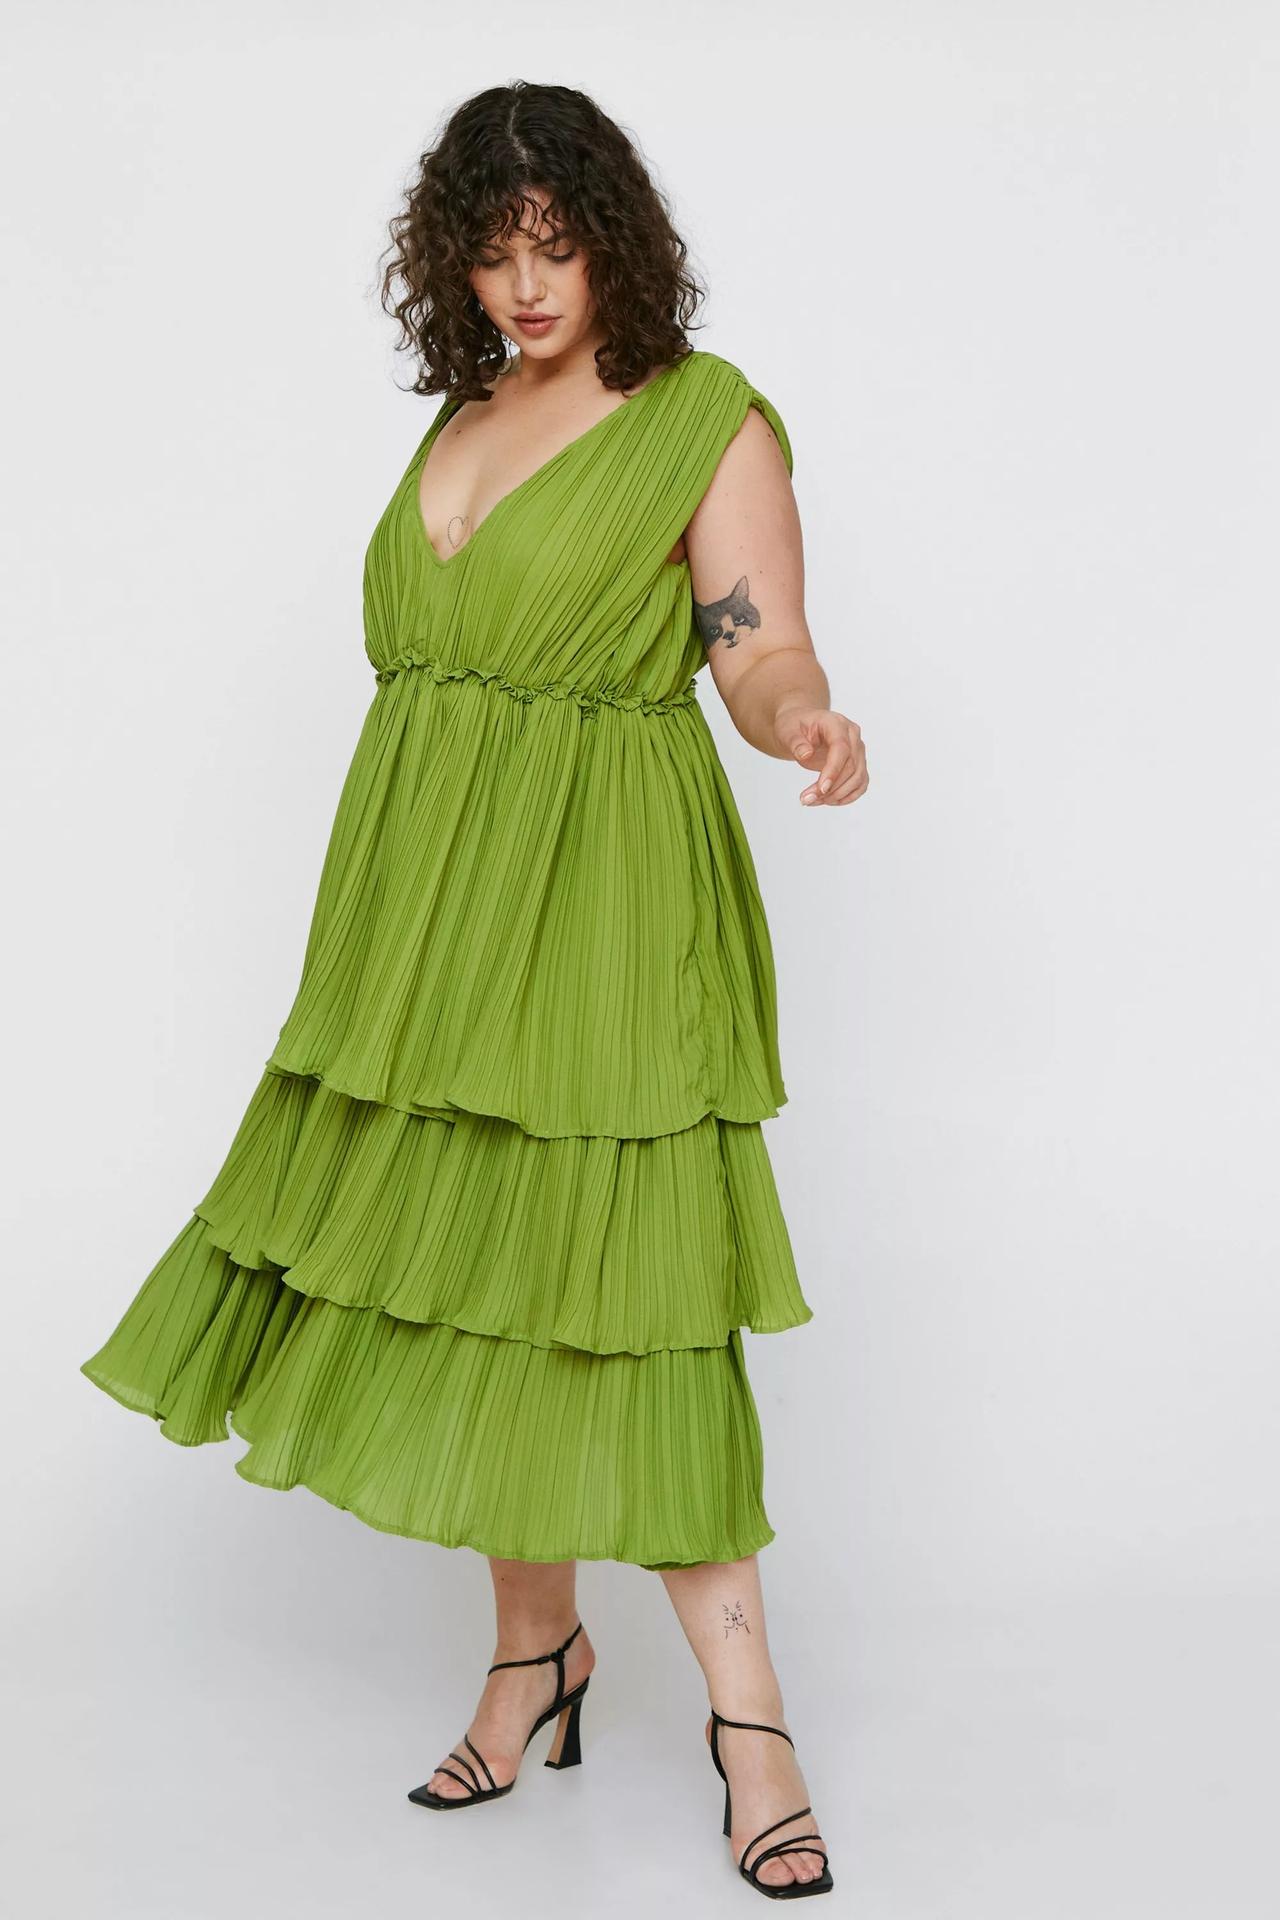 23 Gorgeous Plus Size Wedding Guest Dresses You're Going to Love 